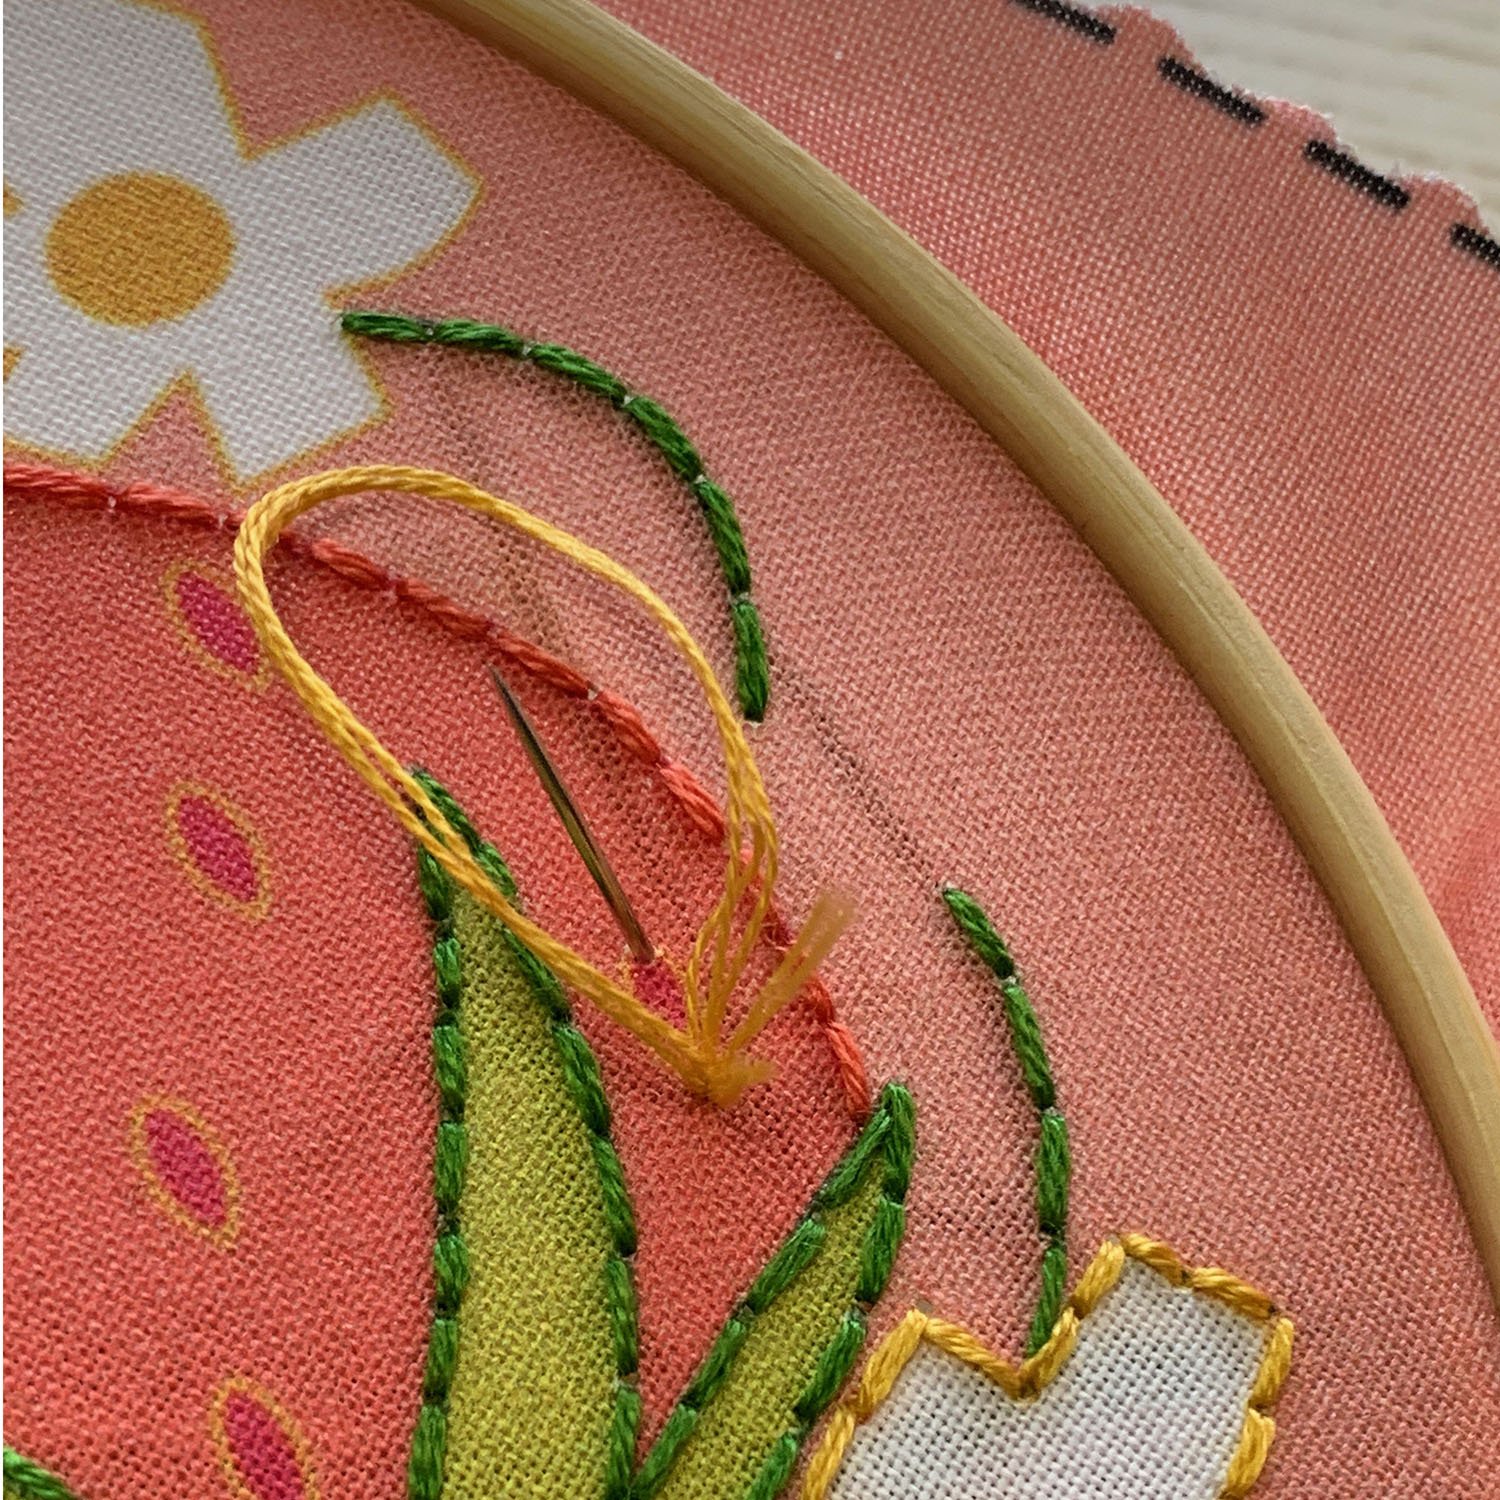 Strawberry embroidery detail 4.jpg